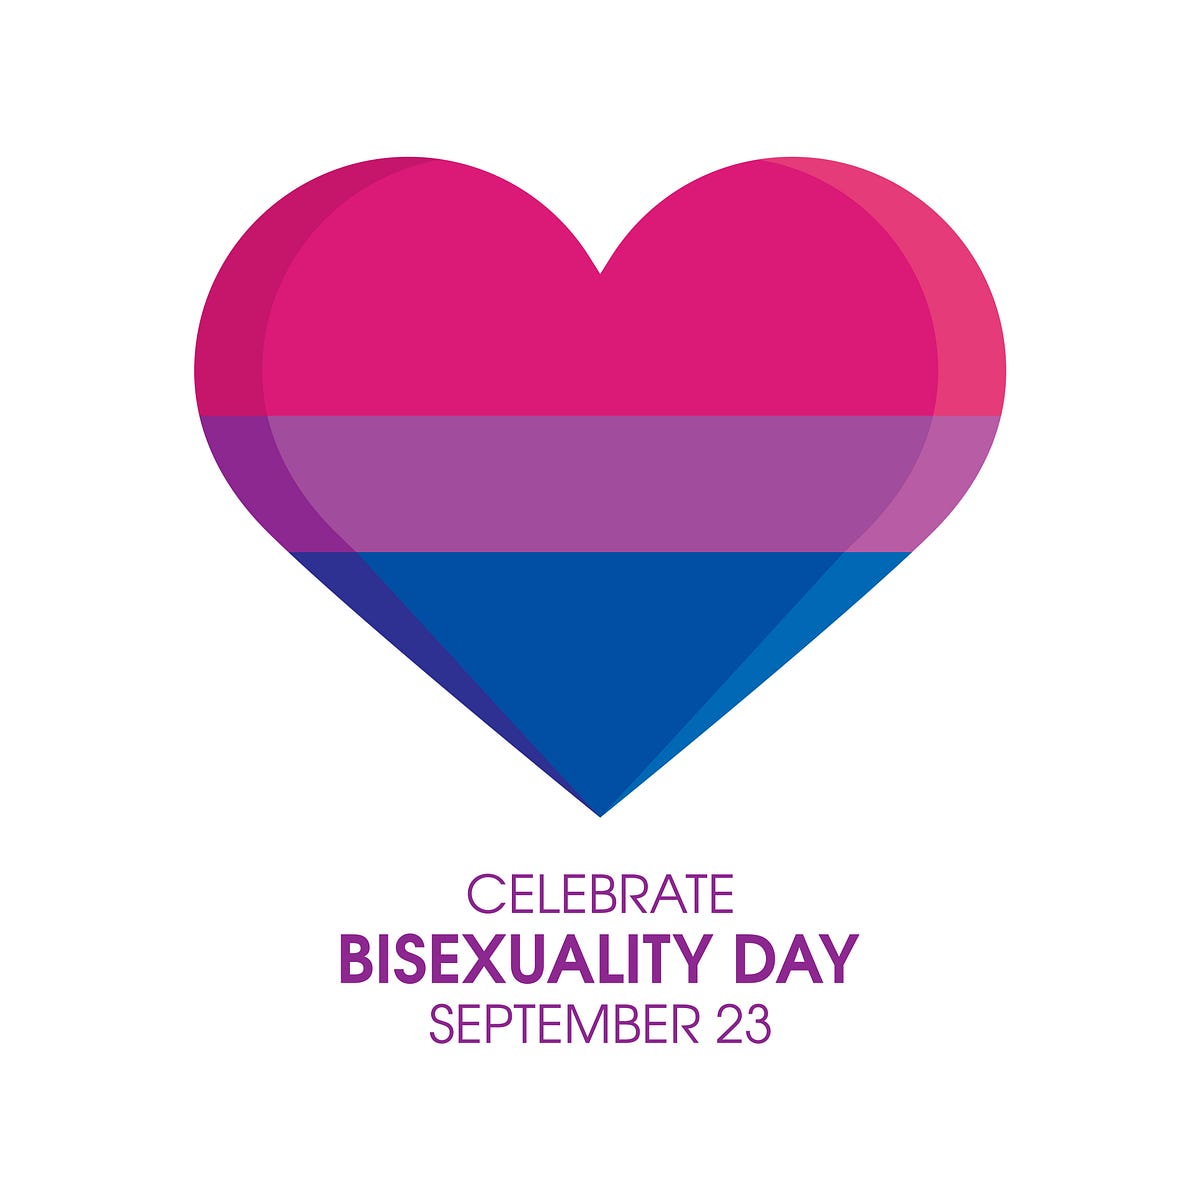 Happy Celebrate Bisexuality Day! Im Coming Out by Wynn Hausser Medium Medium pic